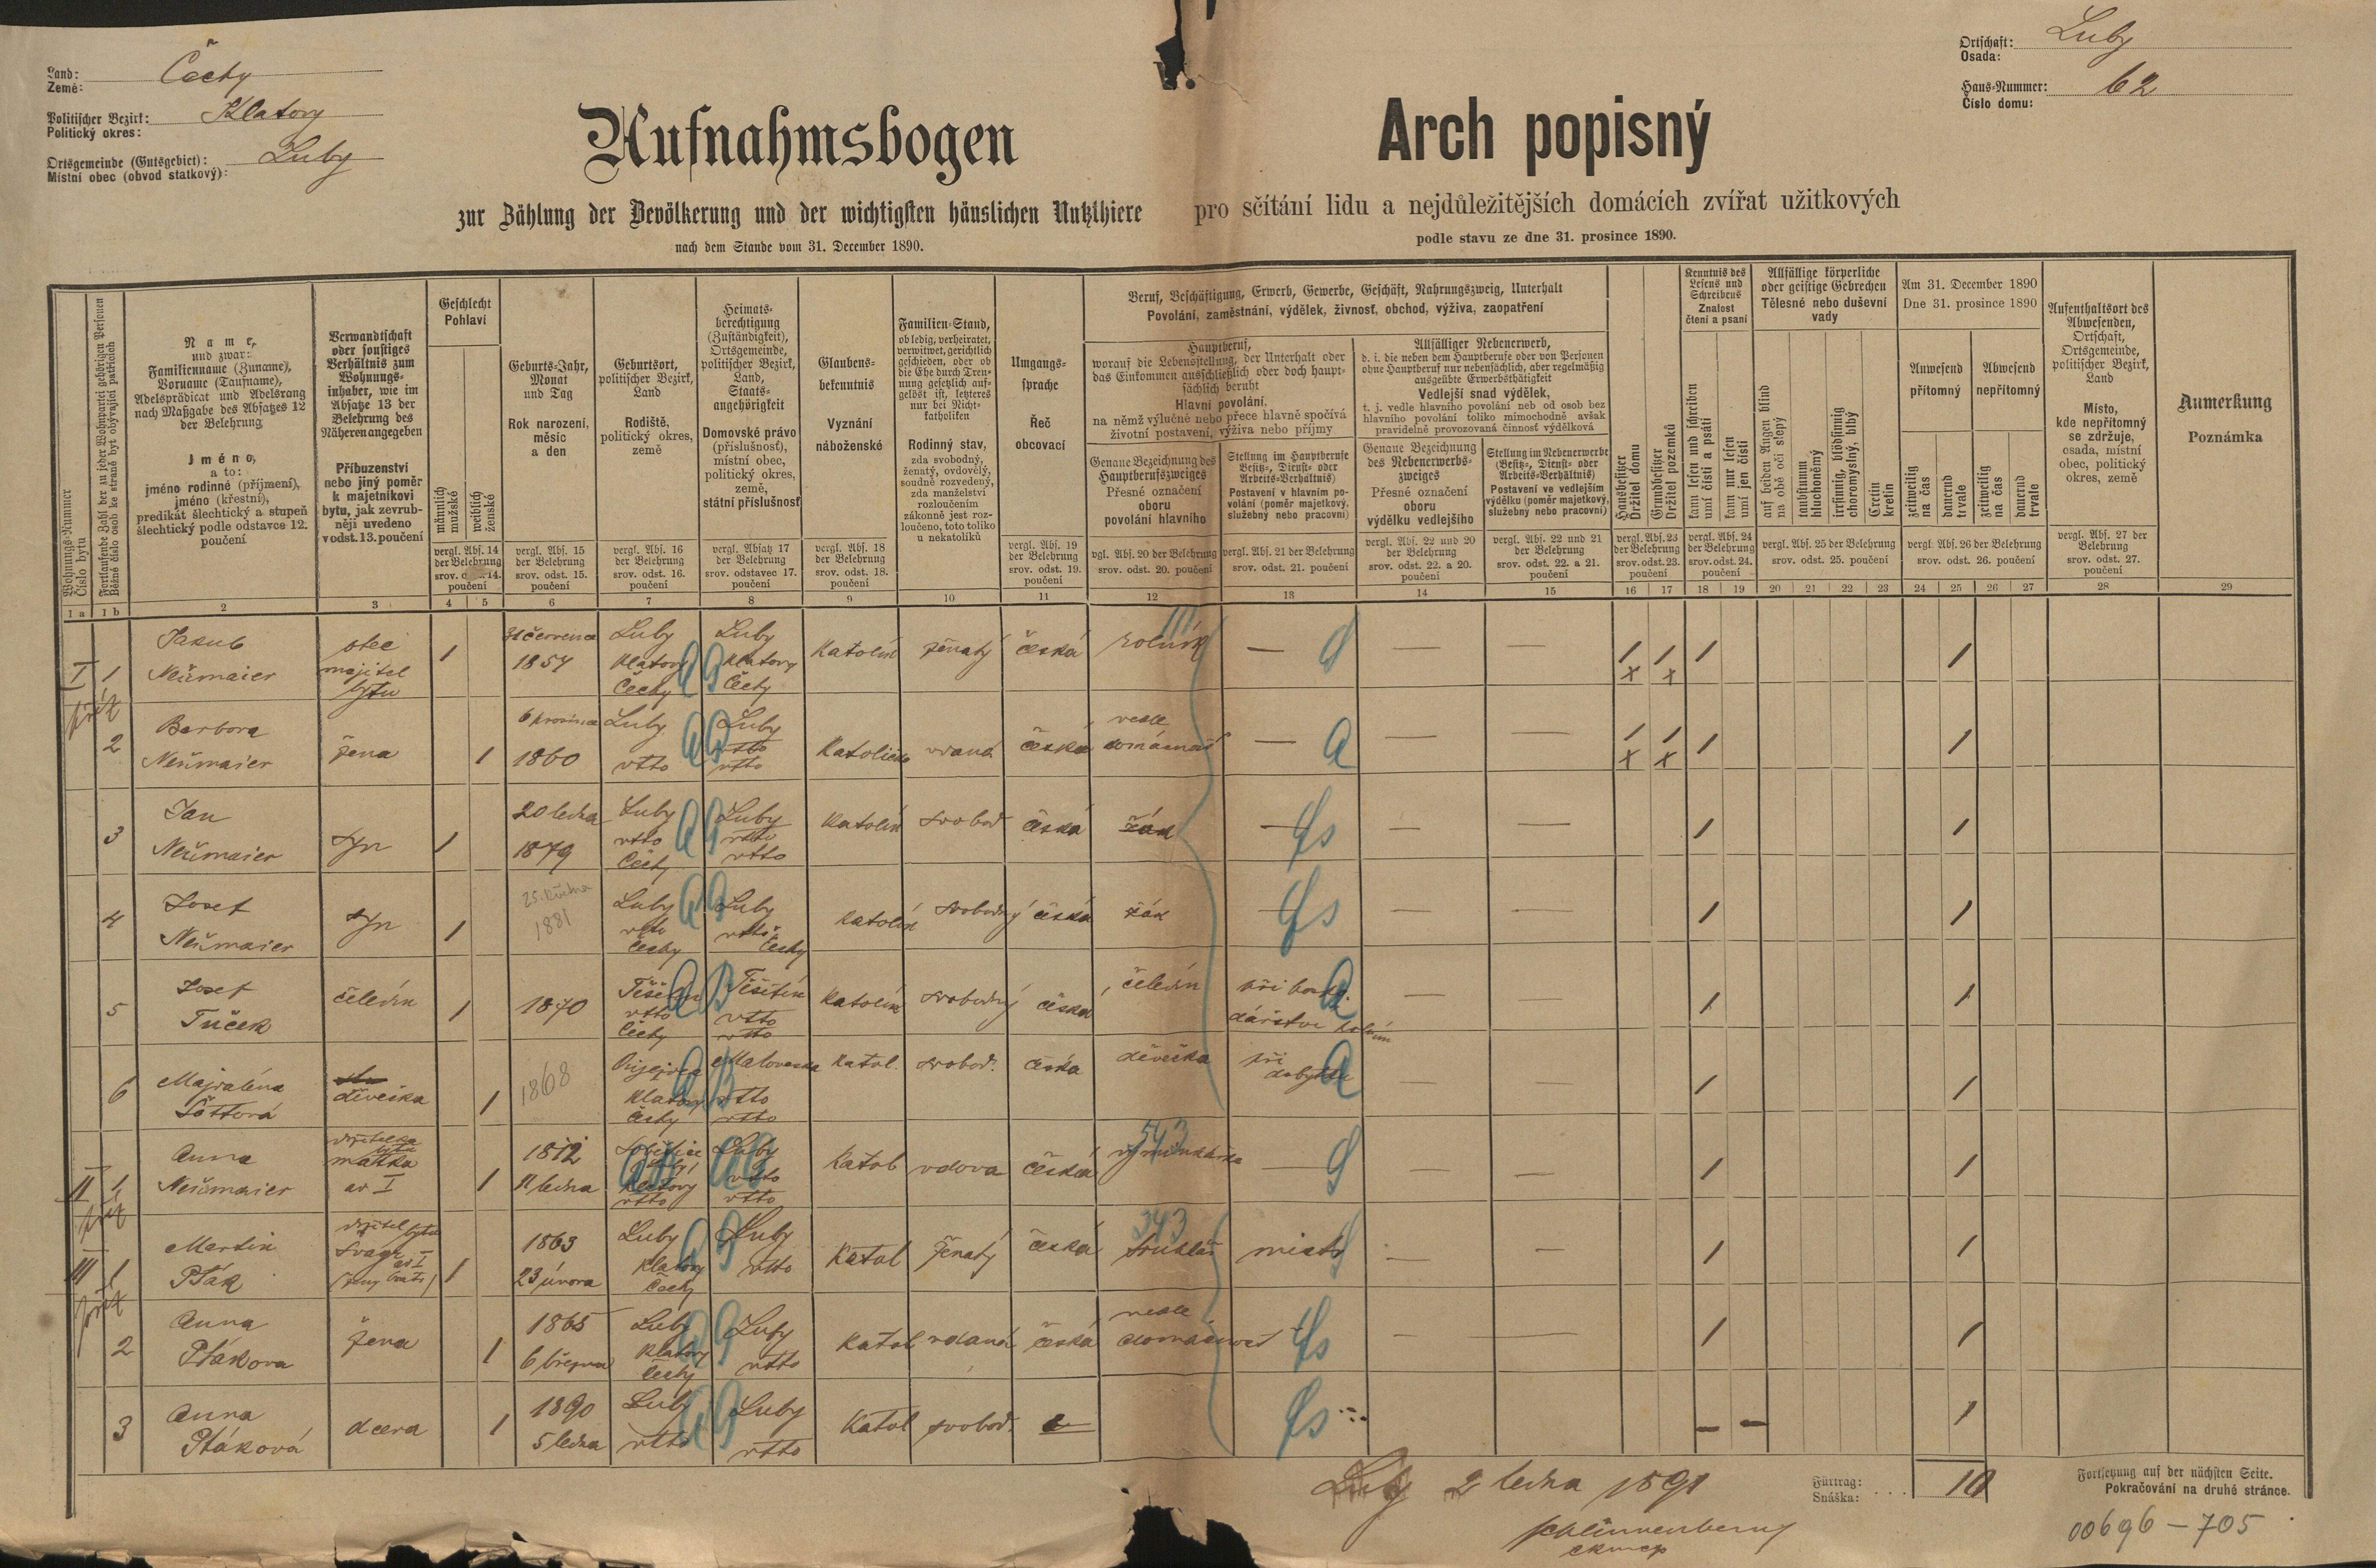 1. soap-kt_01159_census-1890-luby-cp062_0010